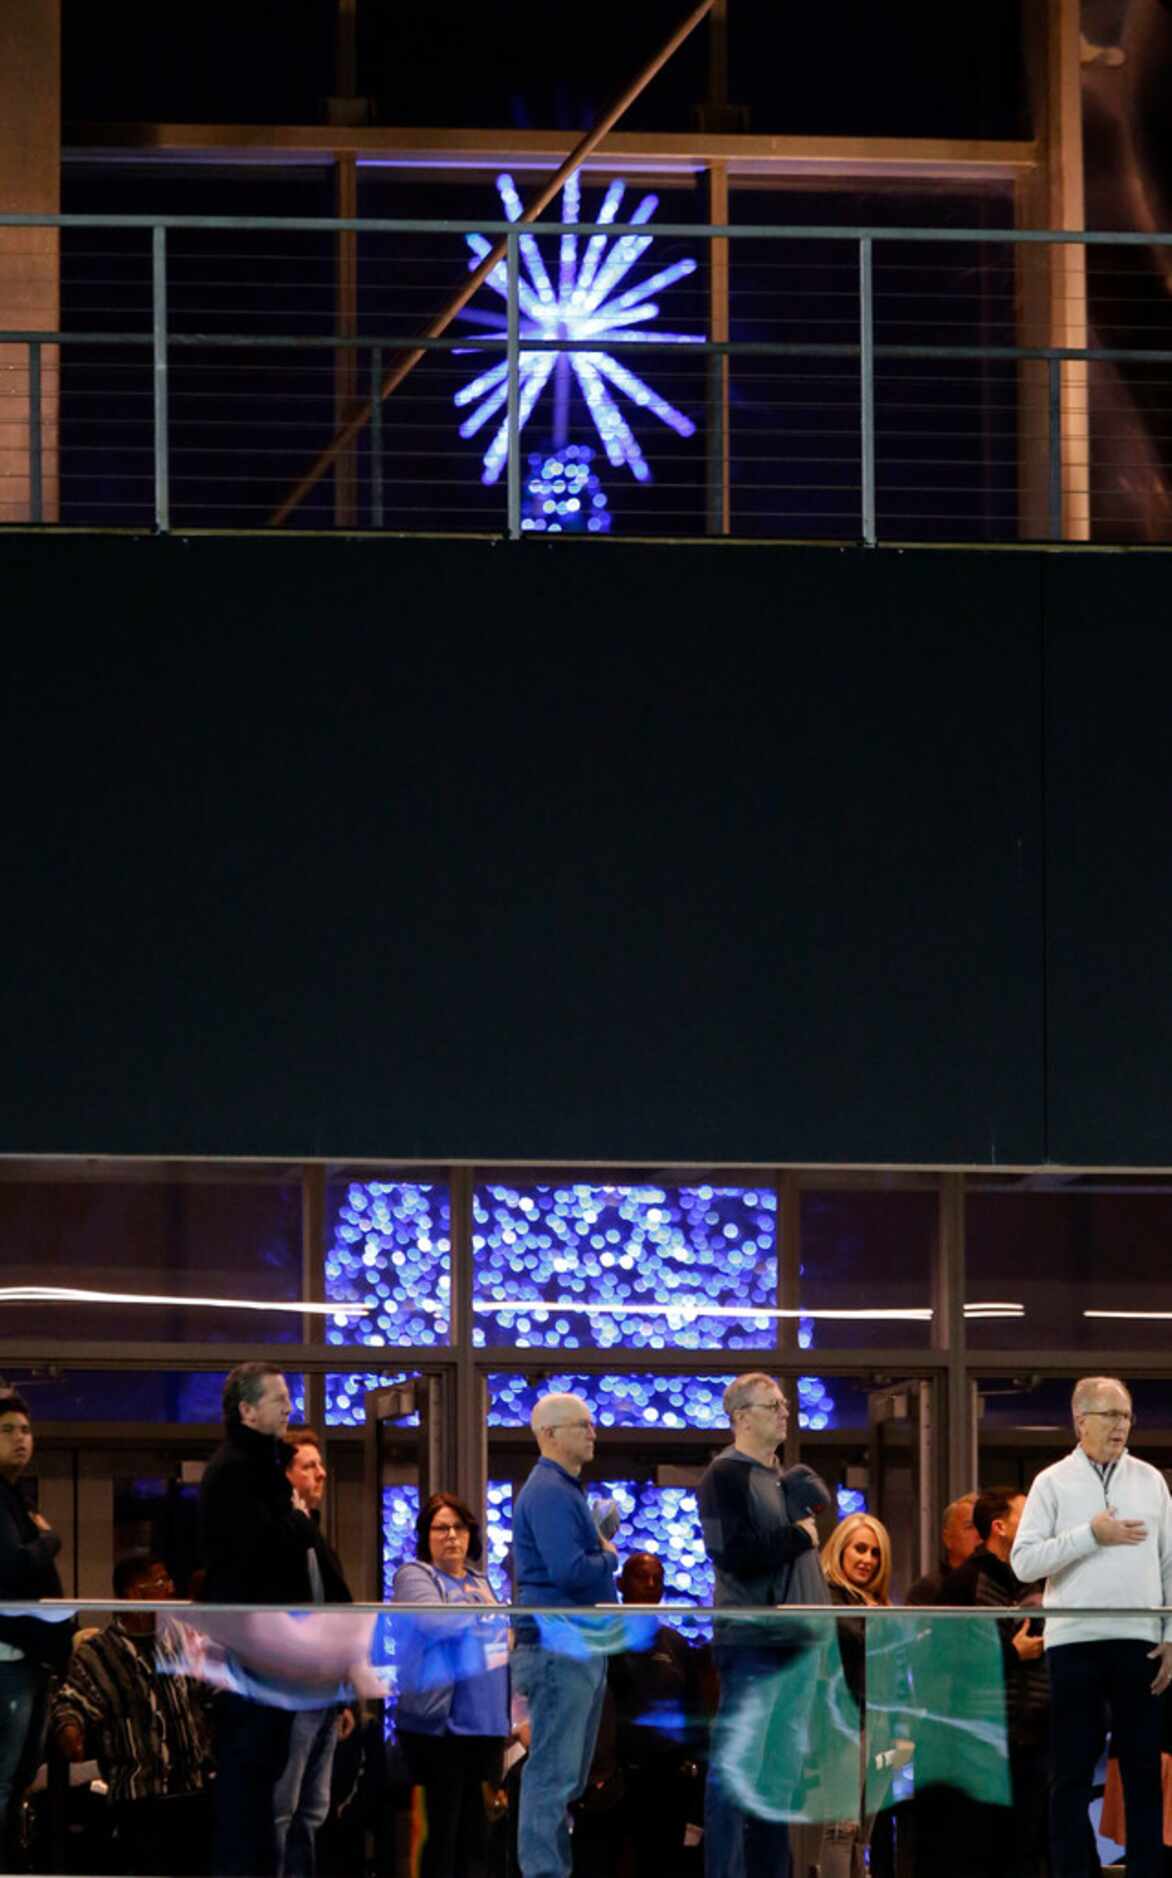 The Star Centre's giant Christmas tree can be seen through the Ford Center's window, as fans...